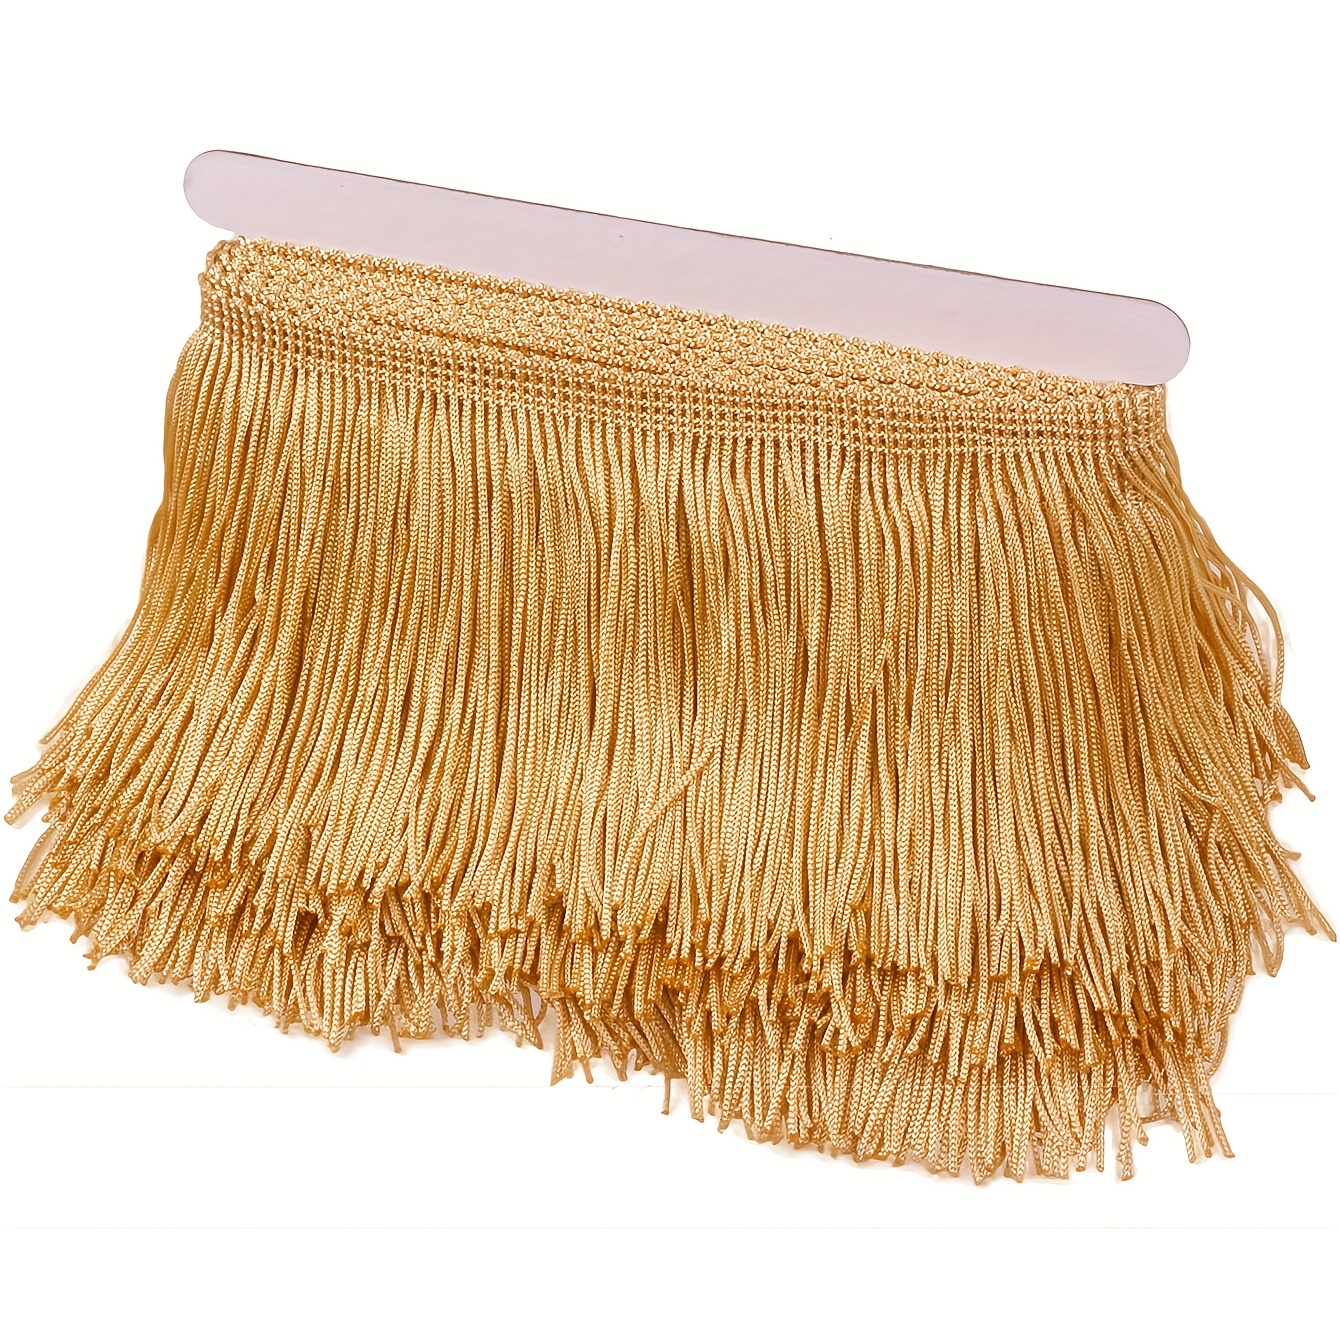 AWAYTR 10 Yards Sewing Fringe Trim - 6in Wide Tassel for DIY Craft Clothing  and Dress Decoration (Gold, 6 Inches Wide)